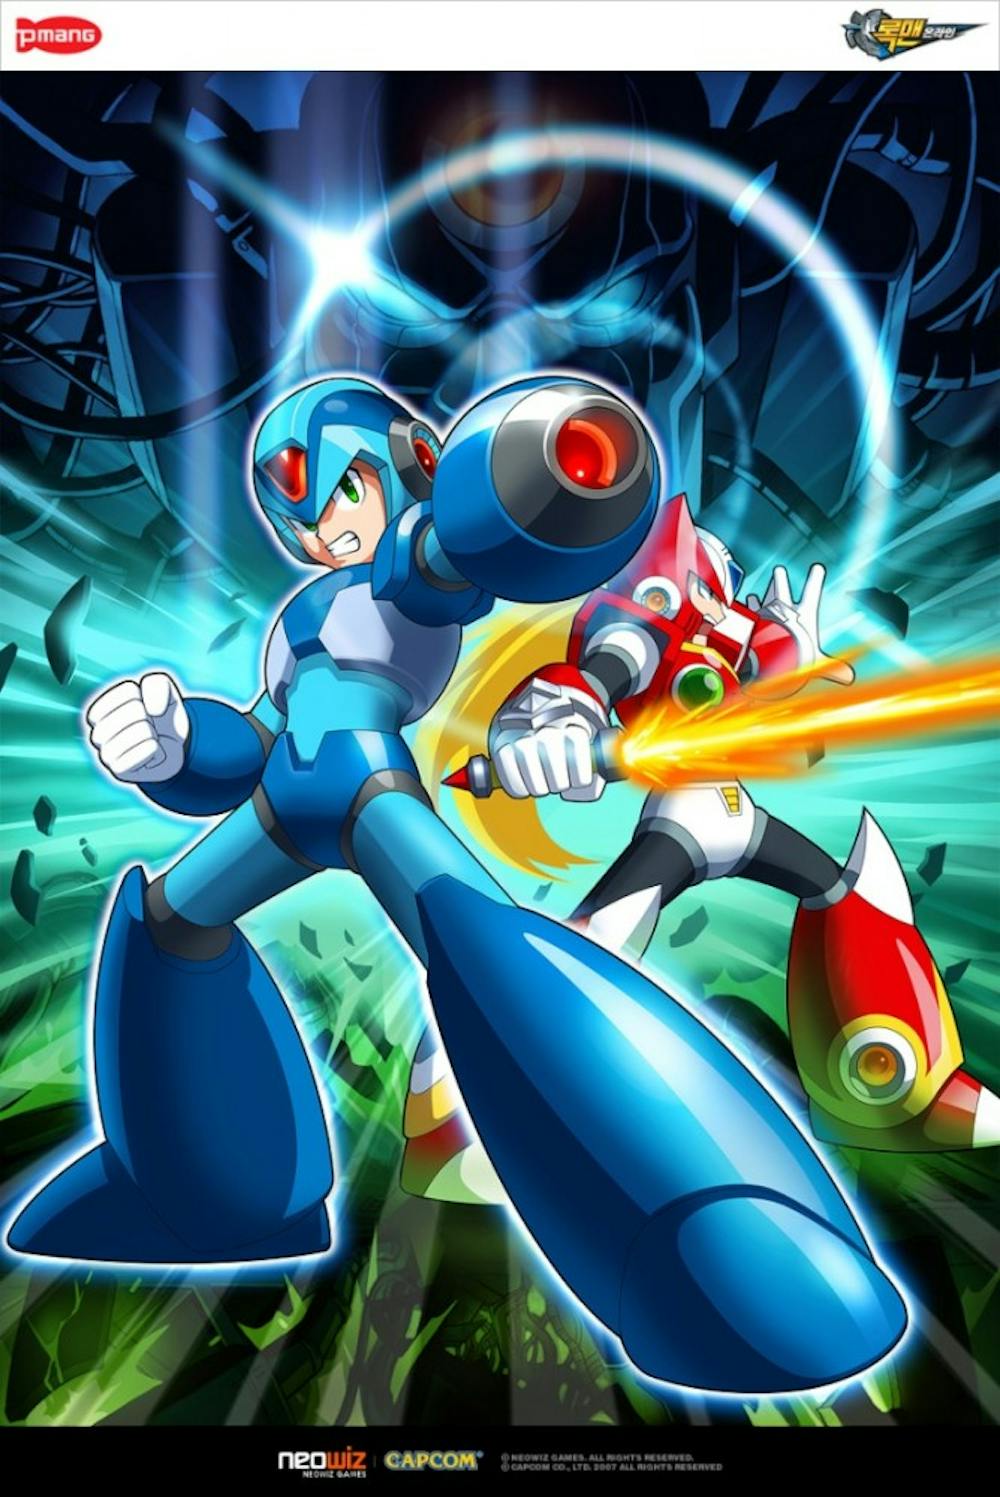 Another project that showed promise, Megaman Online was cancelled for reasons that have yet to have been fully explained. Photo courtesy vgboxart.com